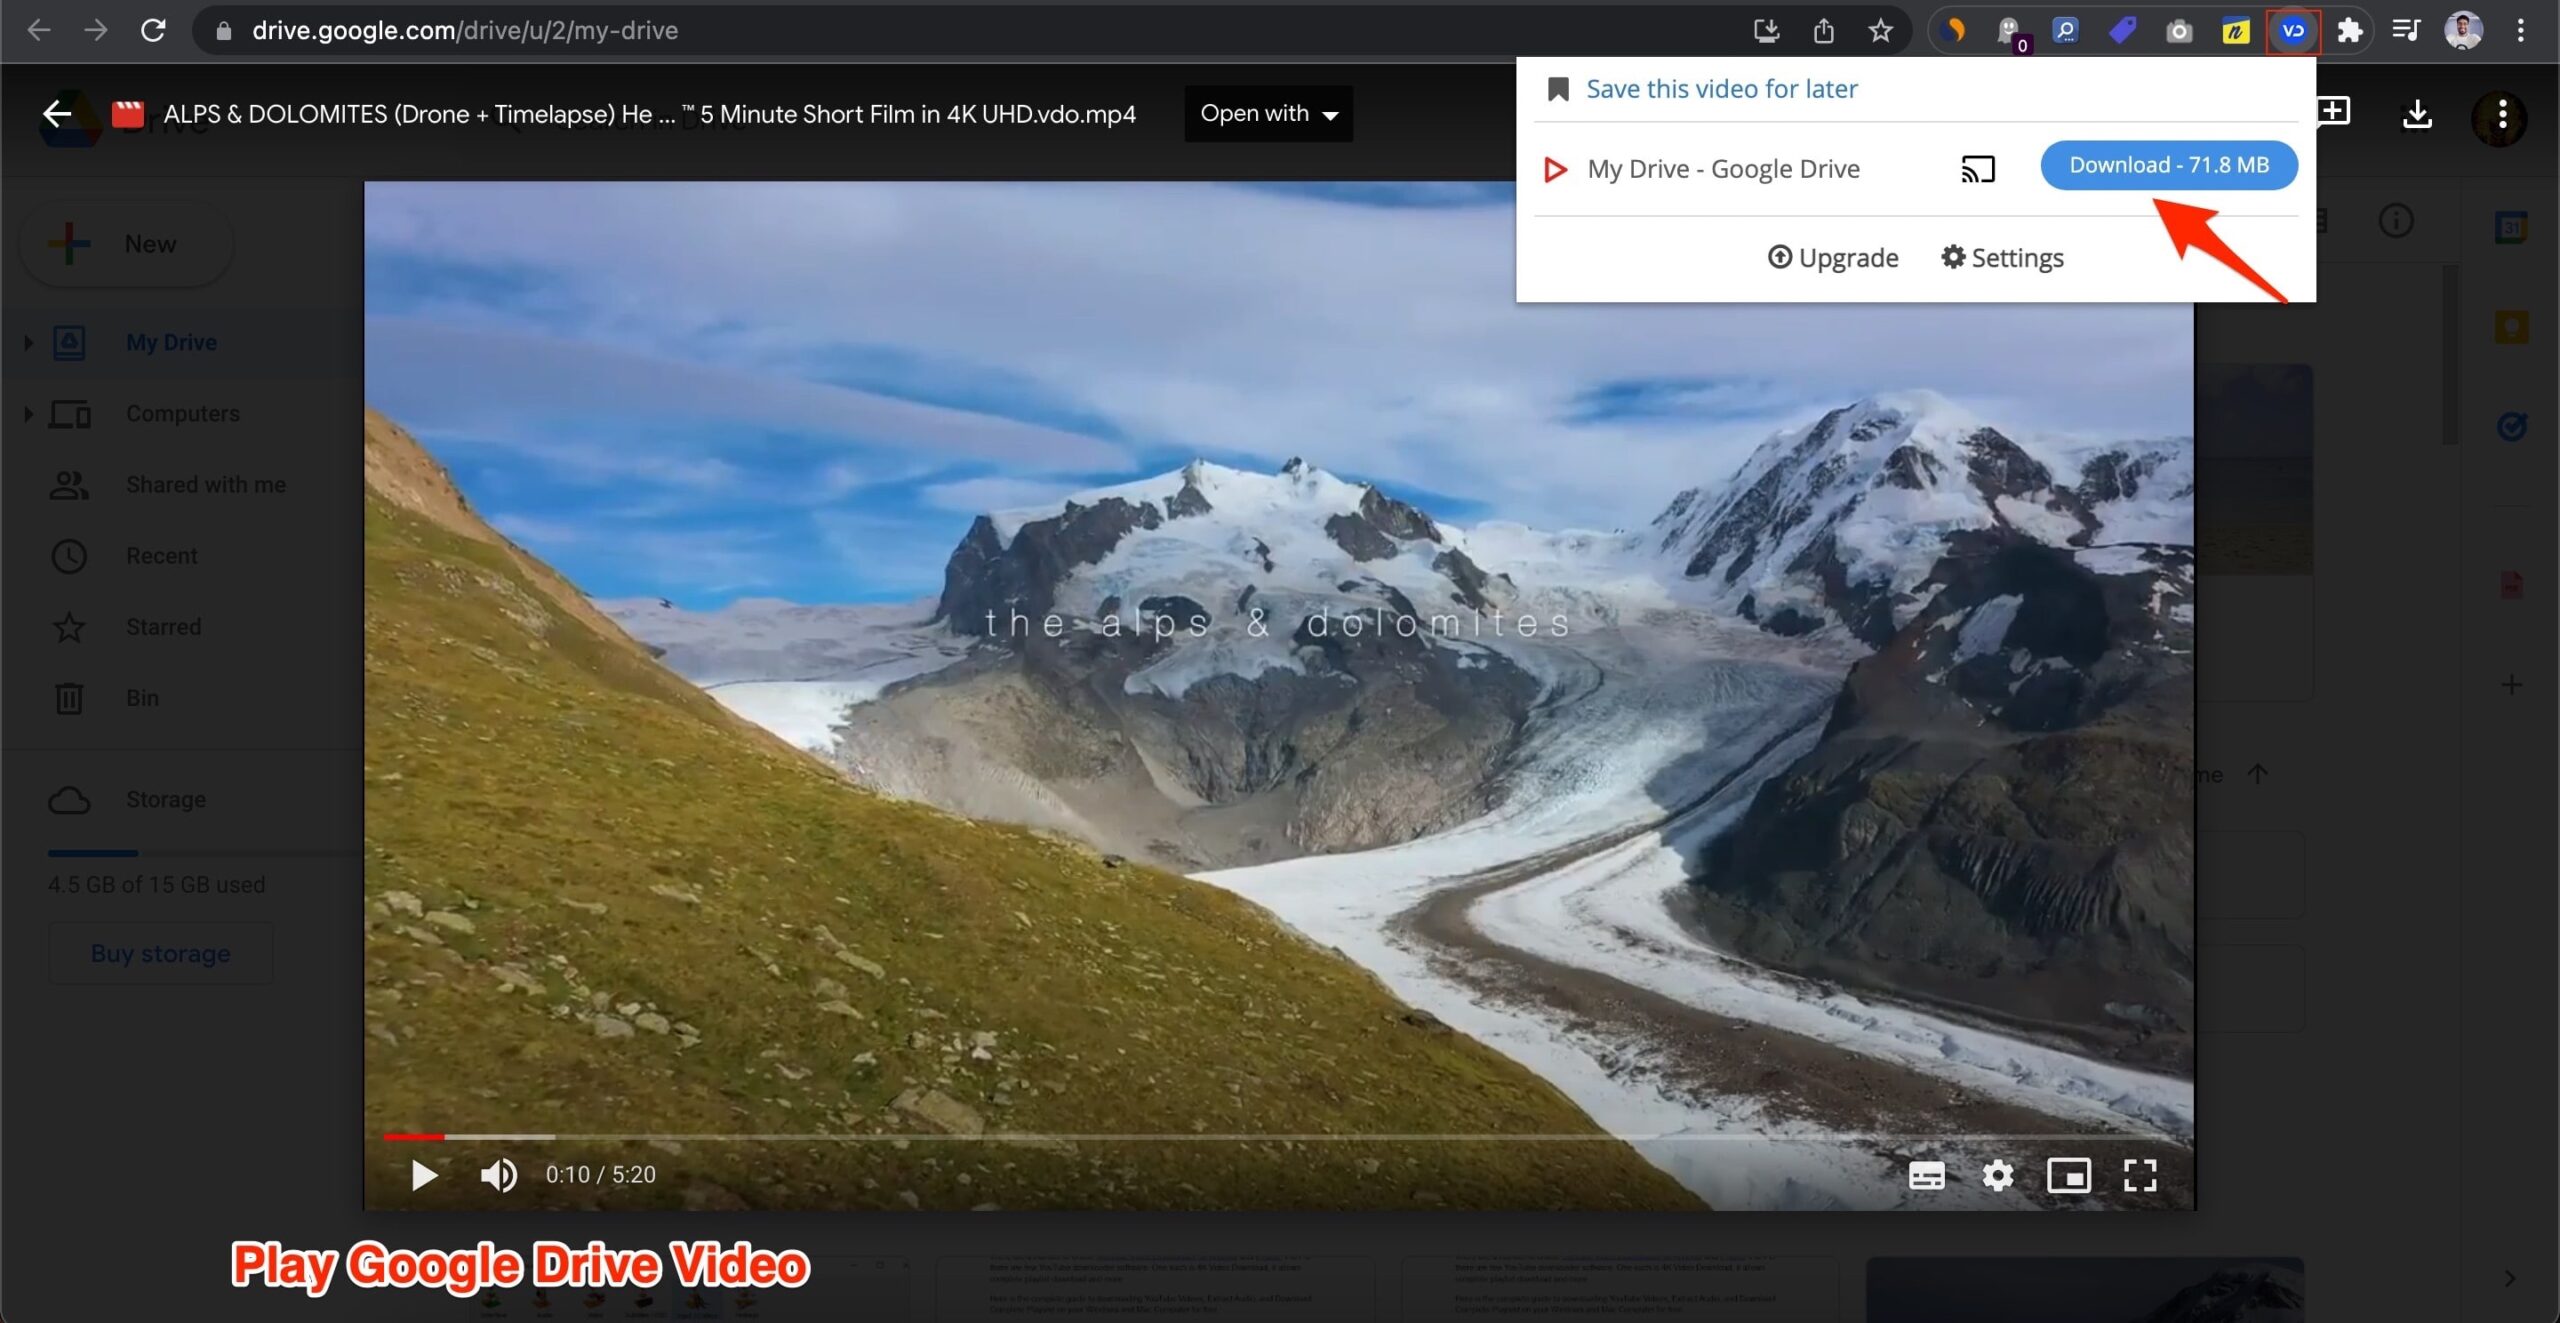 Download Video Using Chrome Extension